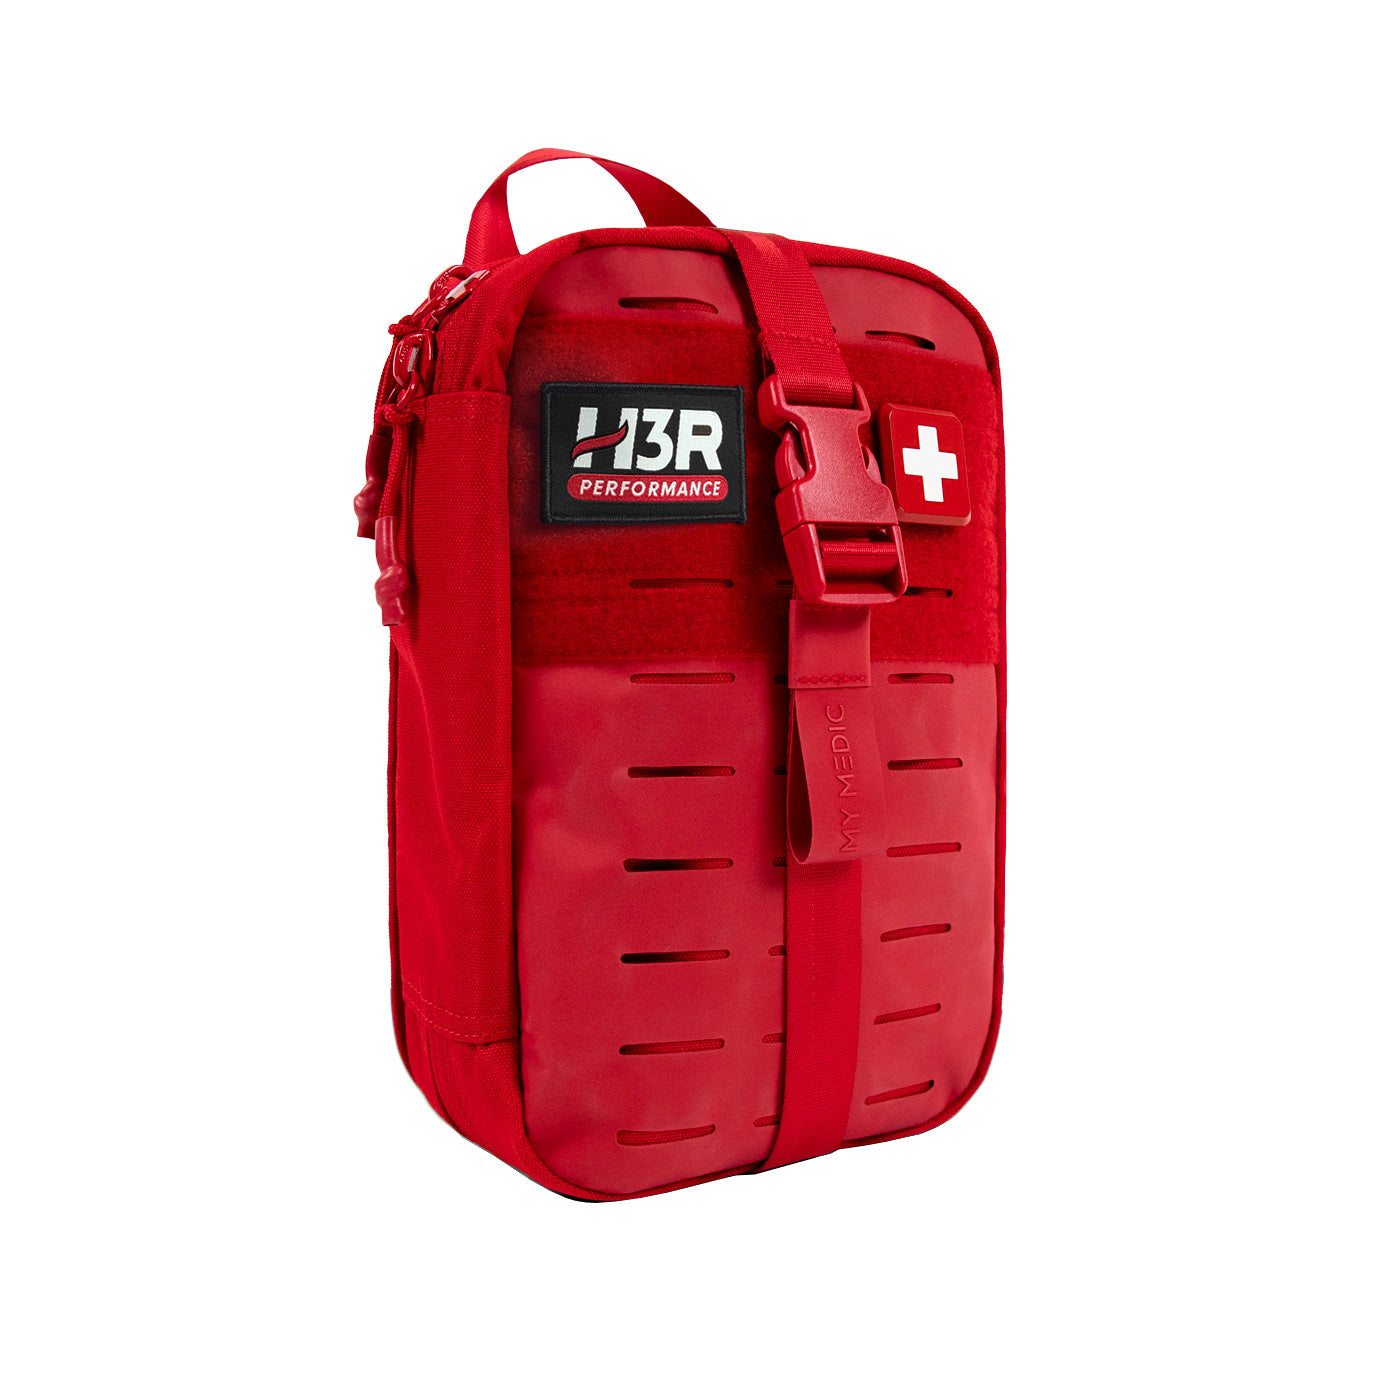 MyFAK Standard First Aid Kit by MyMedic (Red)